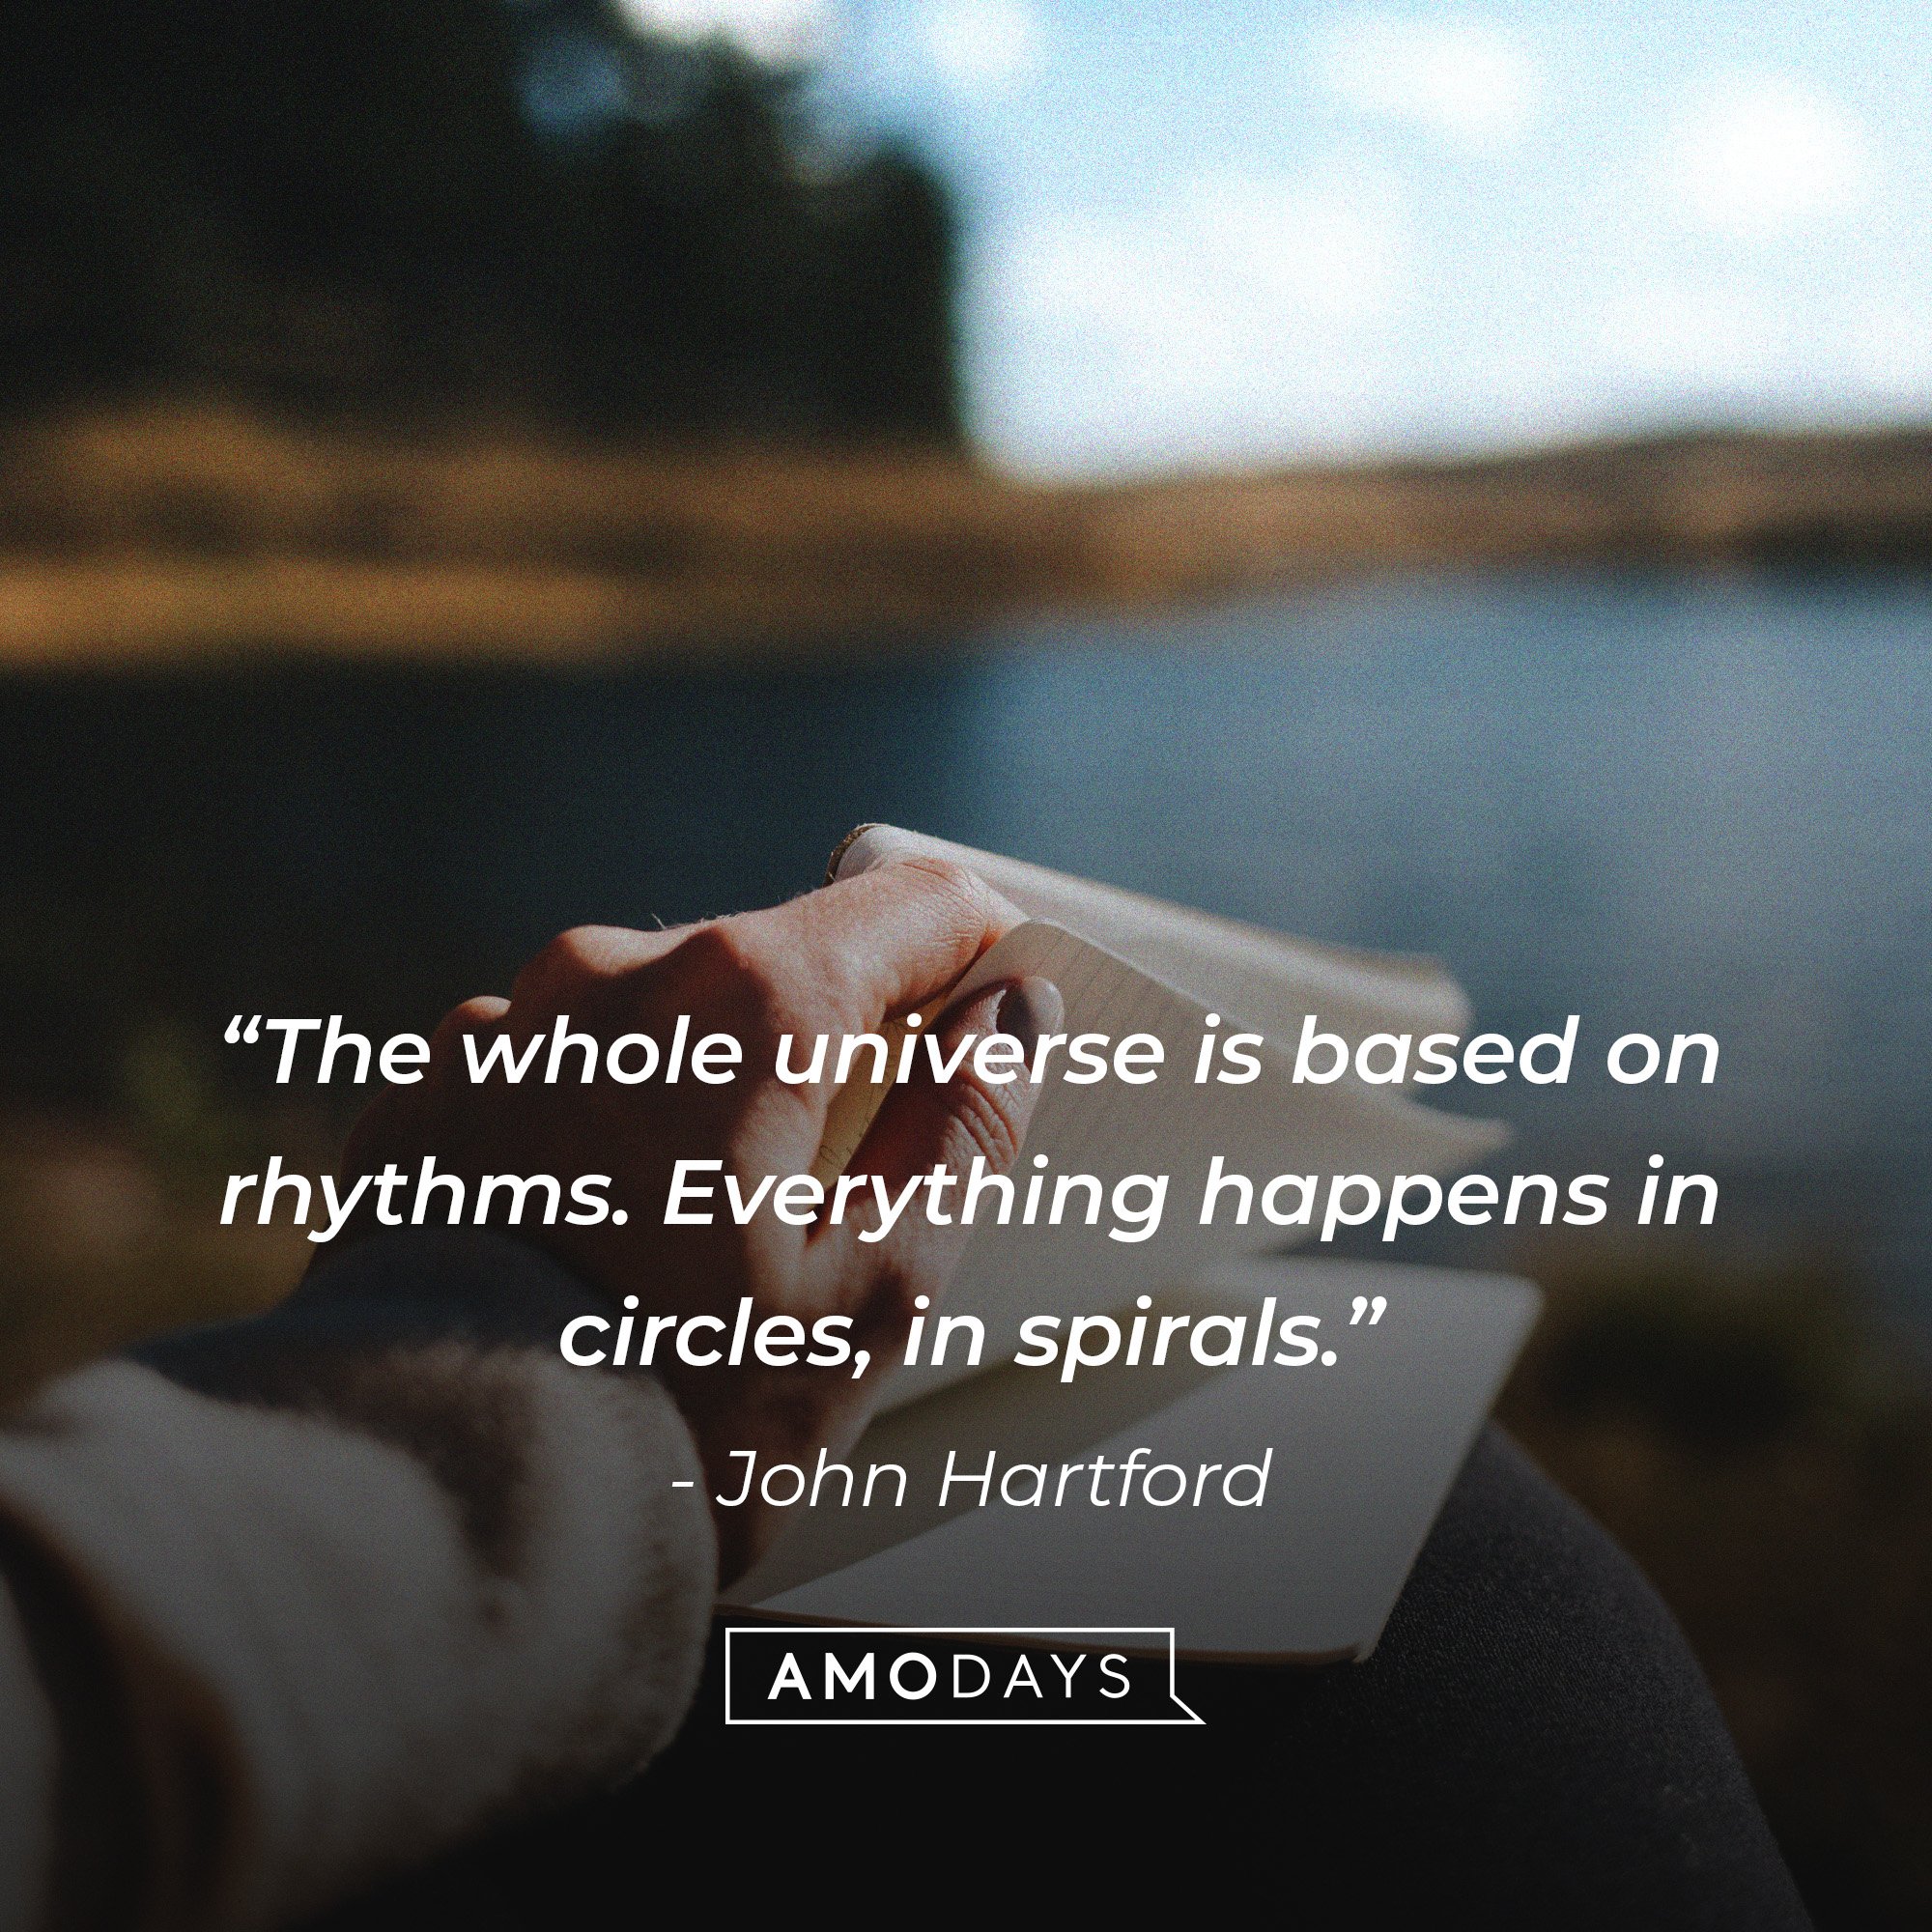 John Hartford's quote: “The whole universe is based on rhythms. Everything happens in circles, in spirals.” | Image: AmoDays